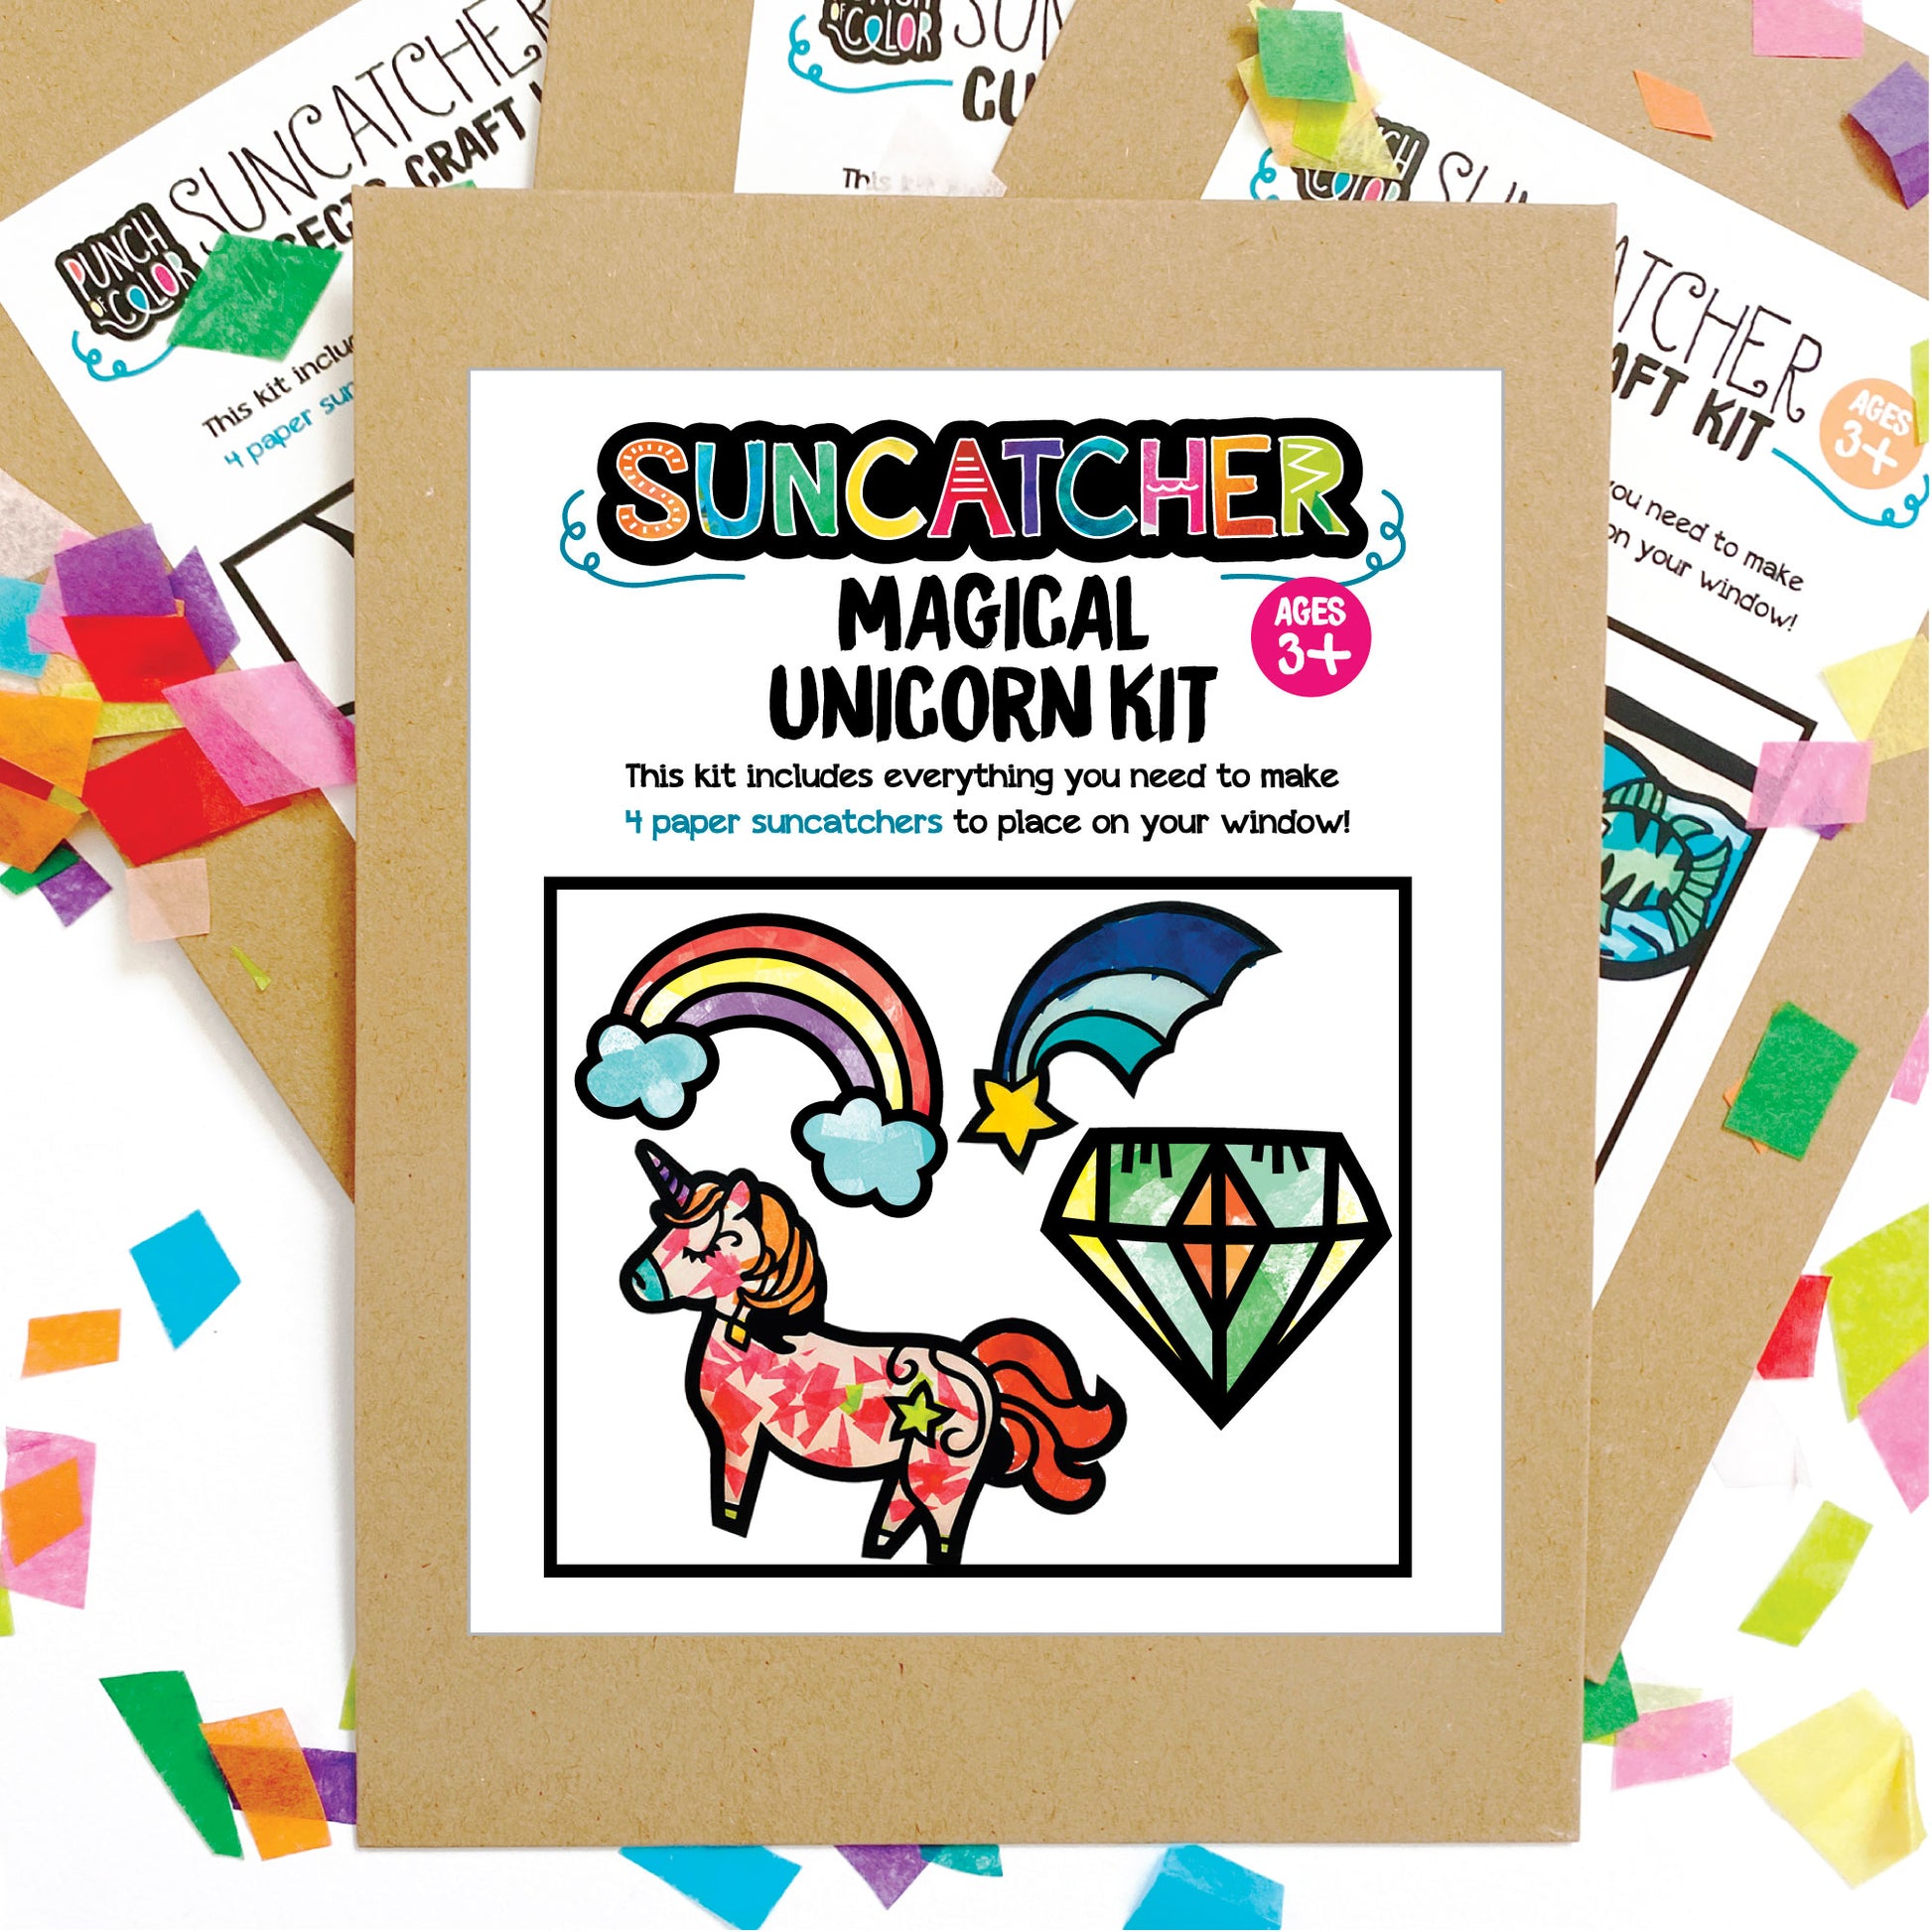 Magical unicorn suncatcher arts and crafts kit, a mess-free paper based activity for toddlers and kids.